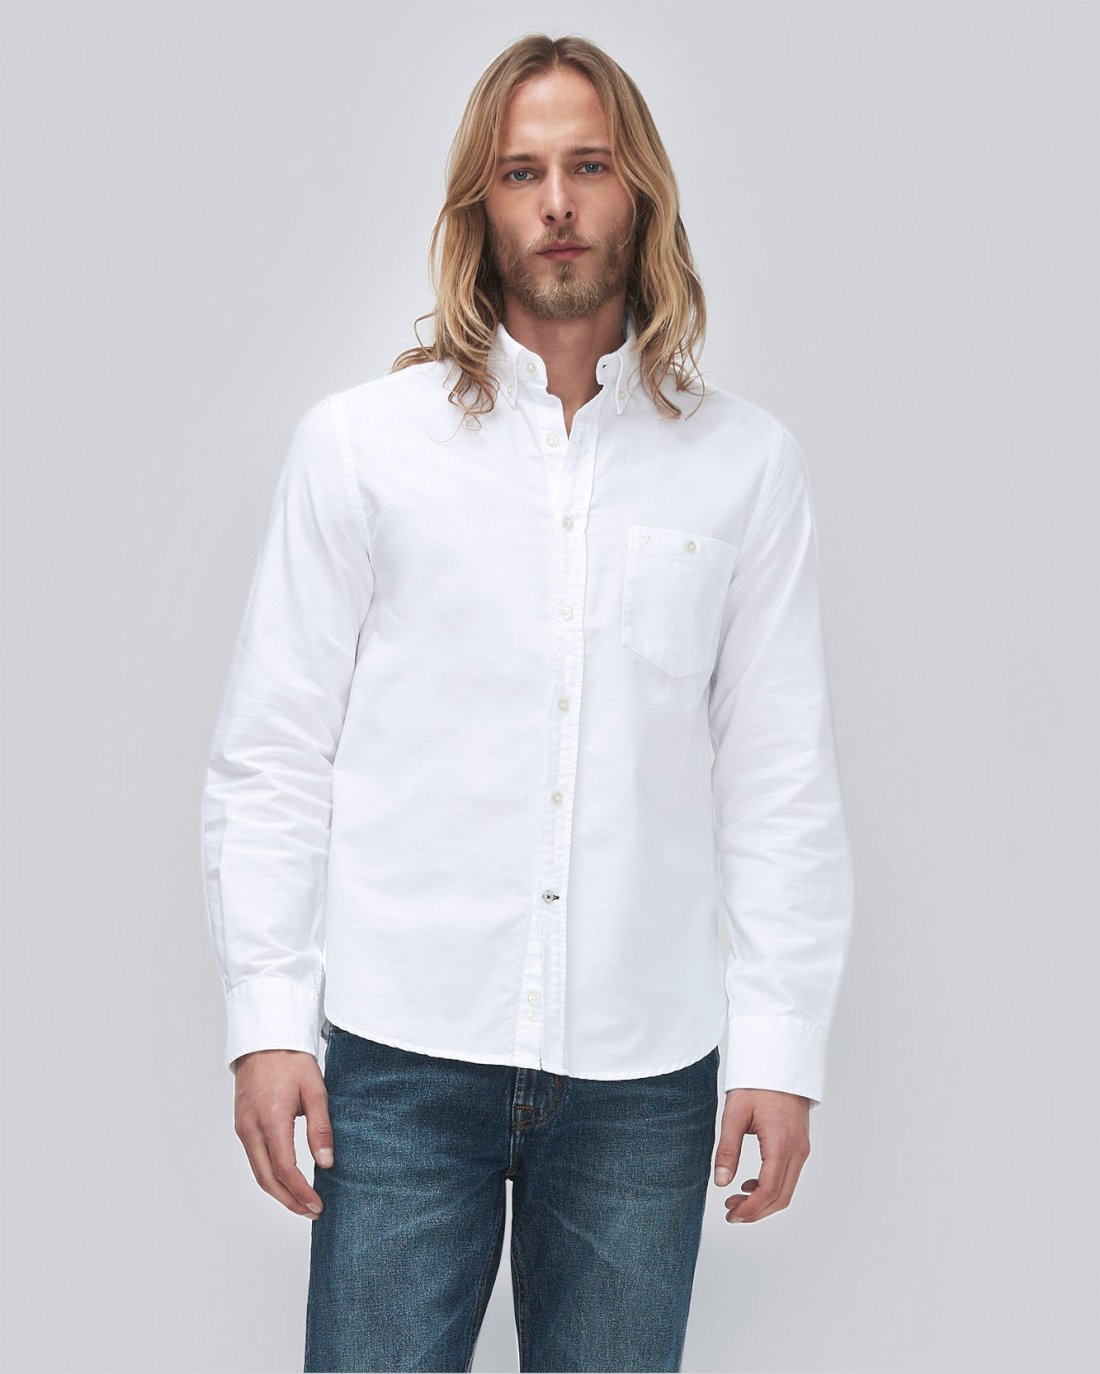 7 For All Mankind Oxford Shirt in White 7M543404WHT